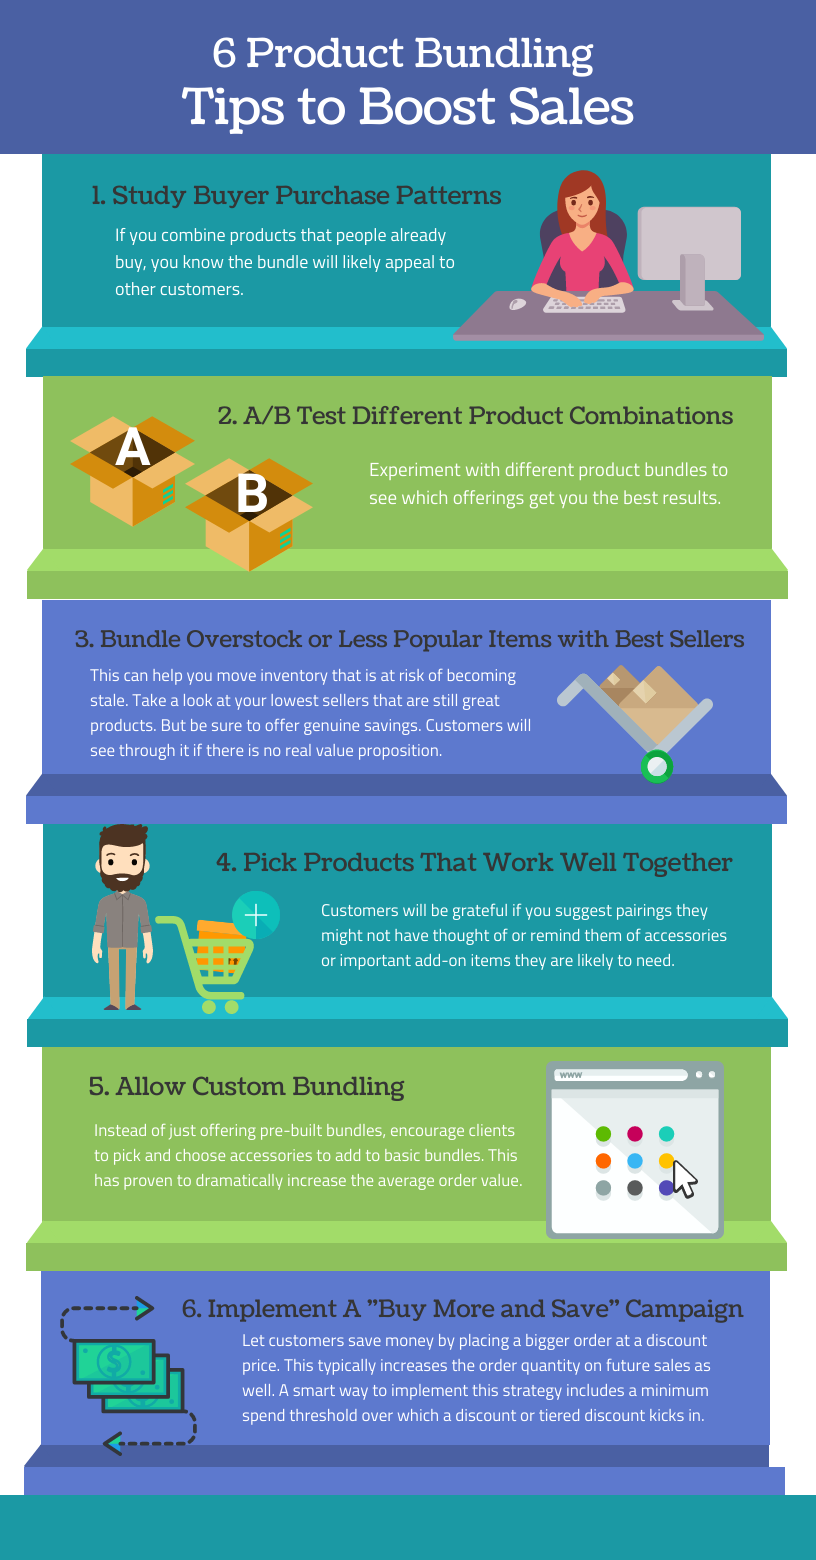 6 Product Bundling Tips to Boost Sales